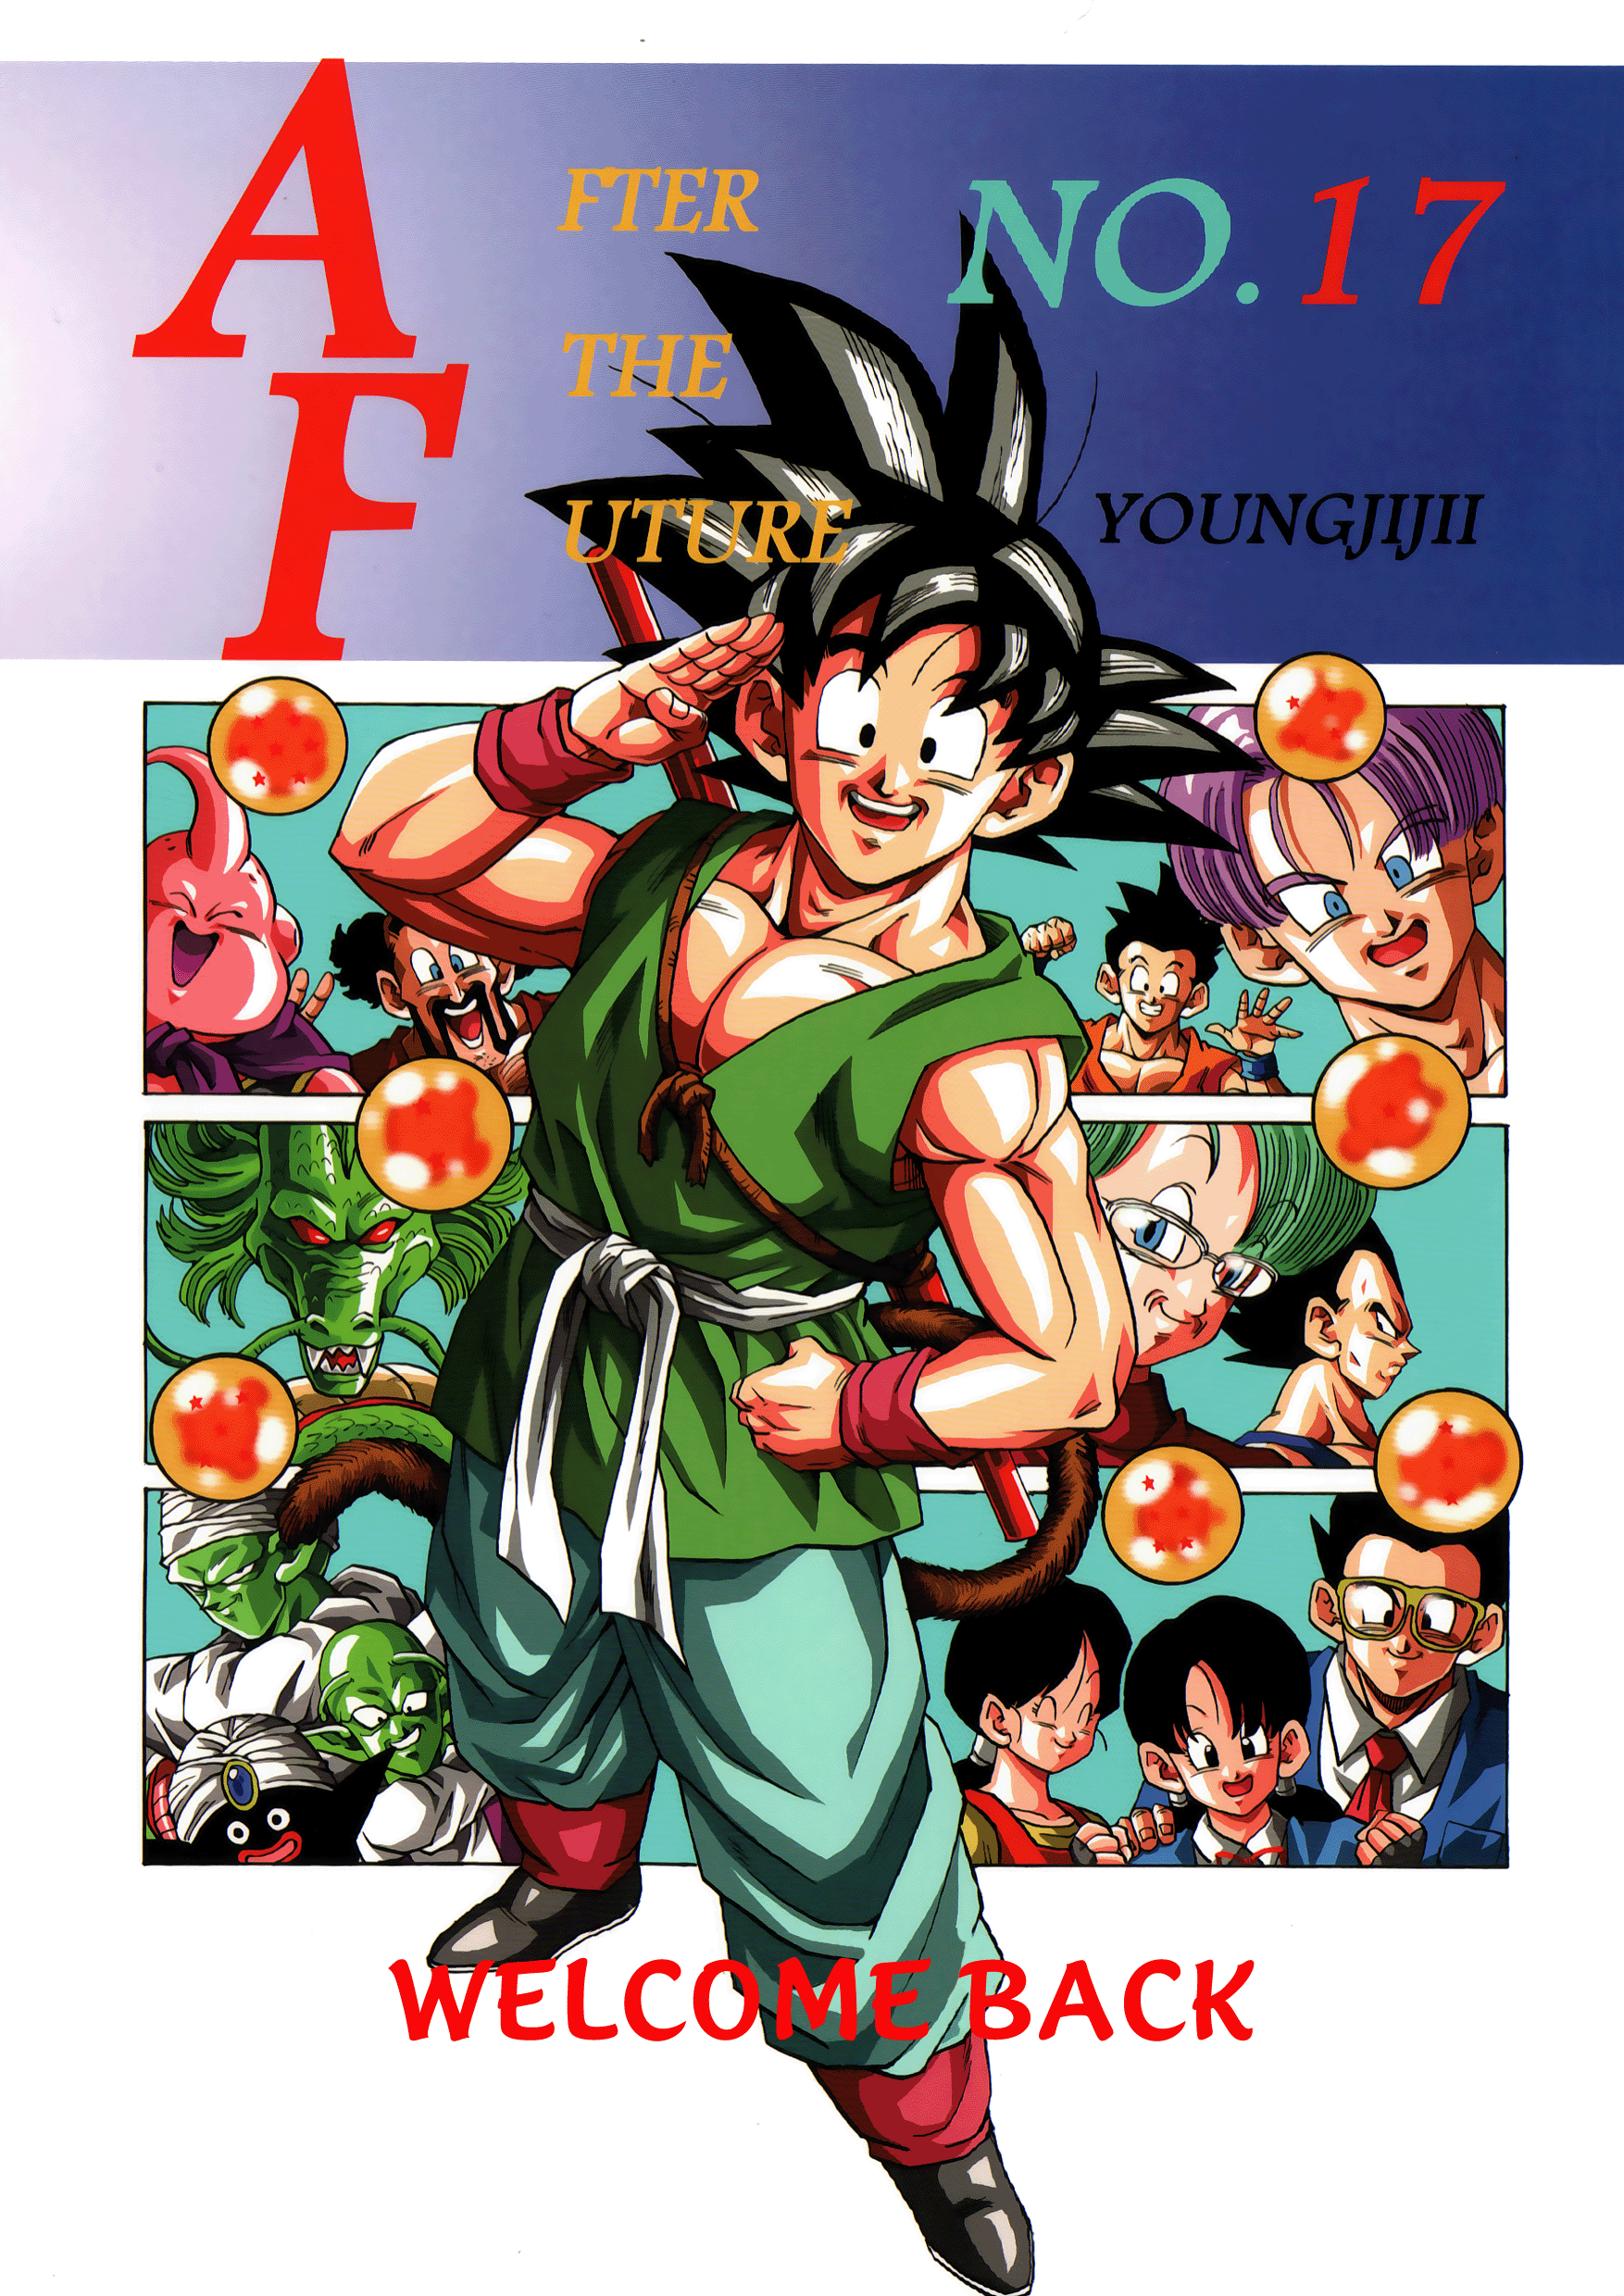 Dragon Ball Af (Young Jijii) (Doujinshi) Chapter 17: Welcome Back - Picture 1